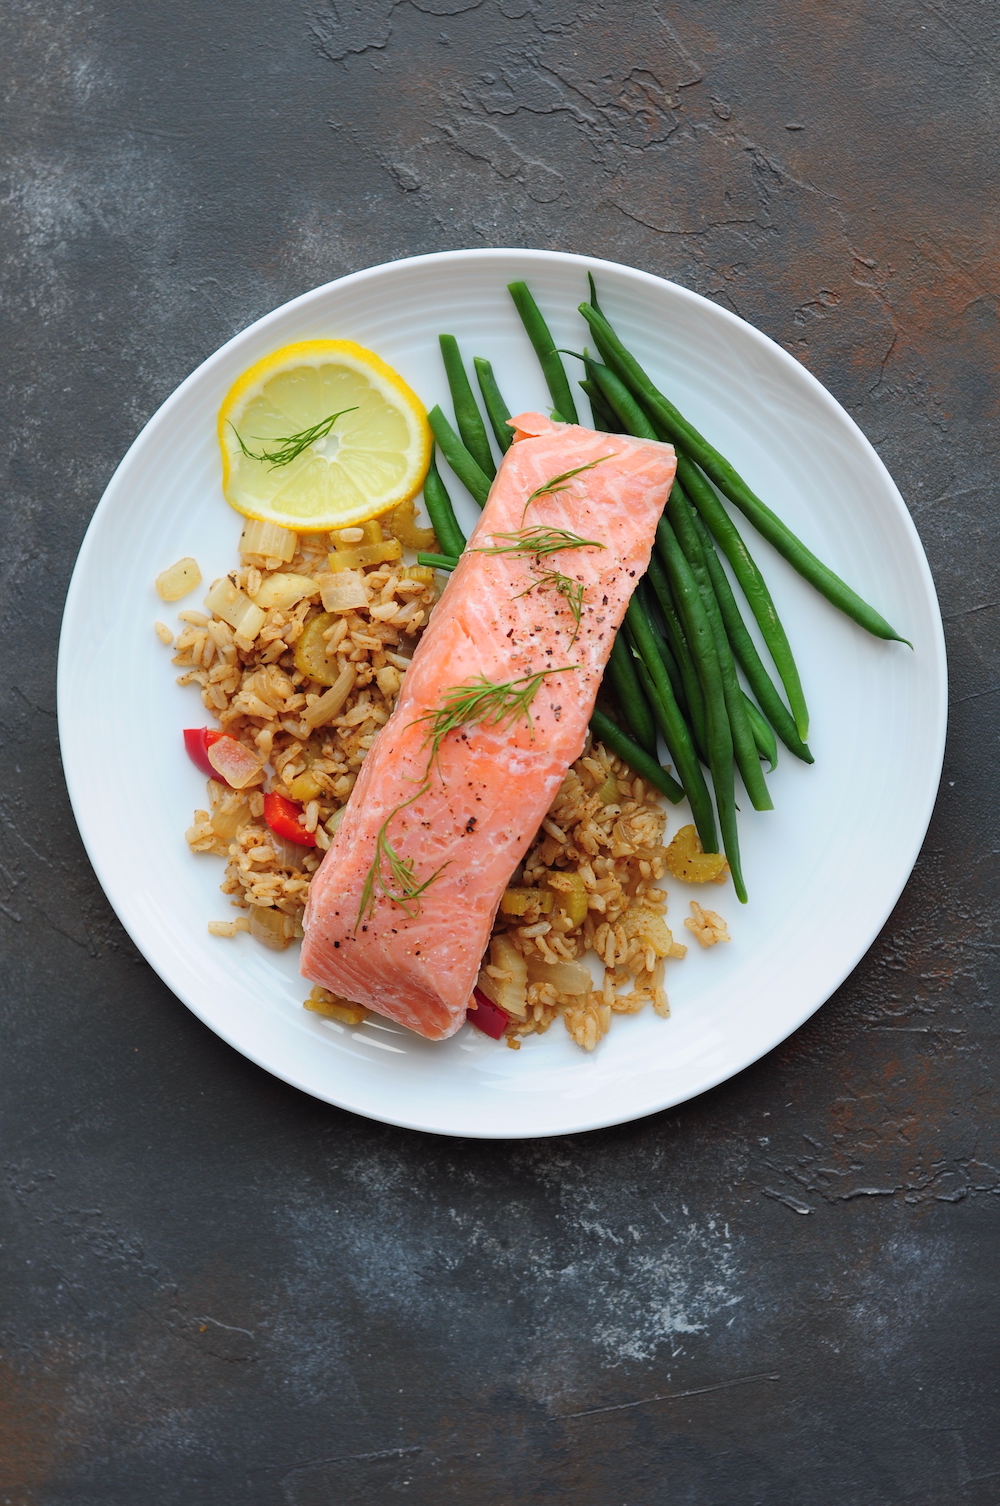 Sous vide salmon with green beans and dirty rice